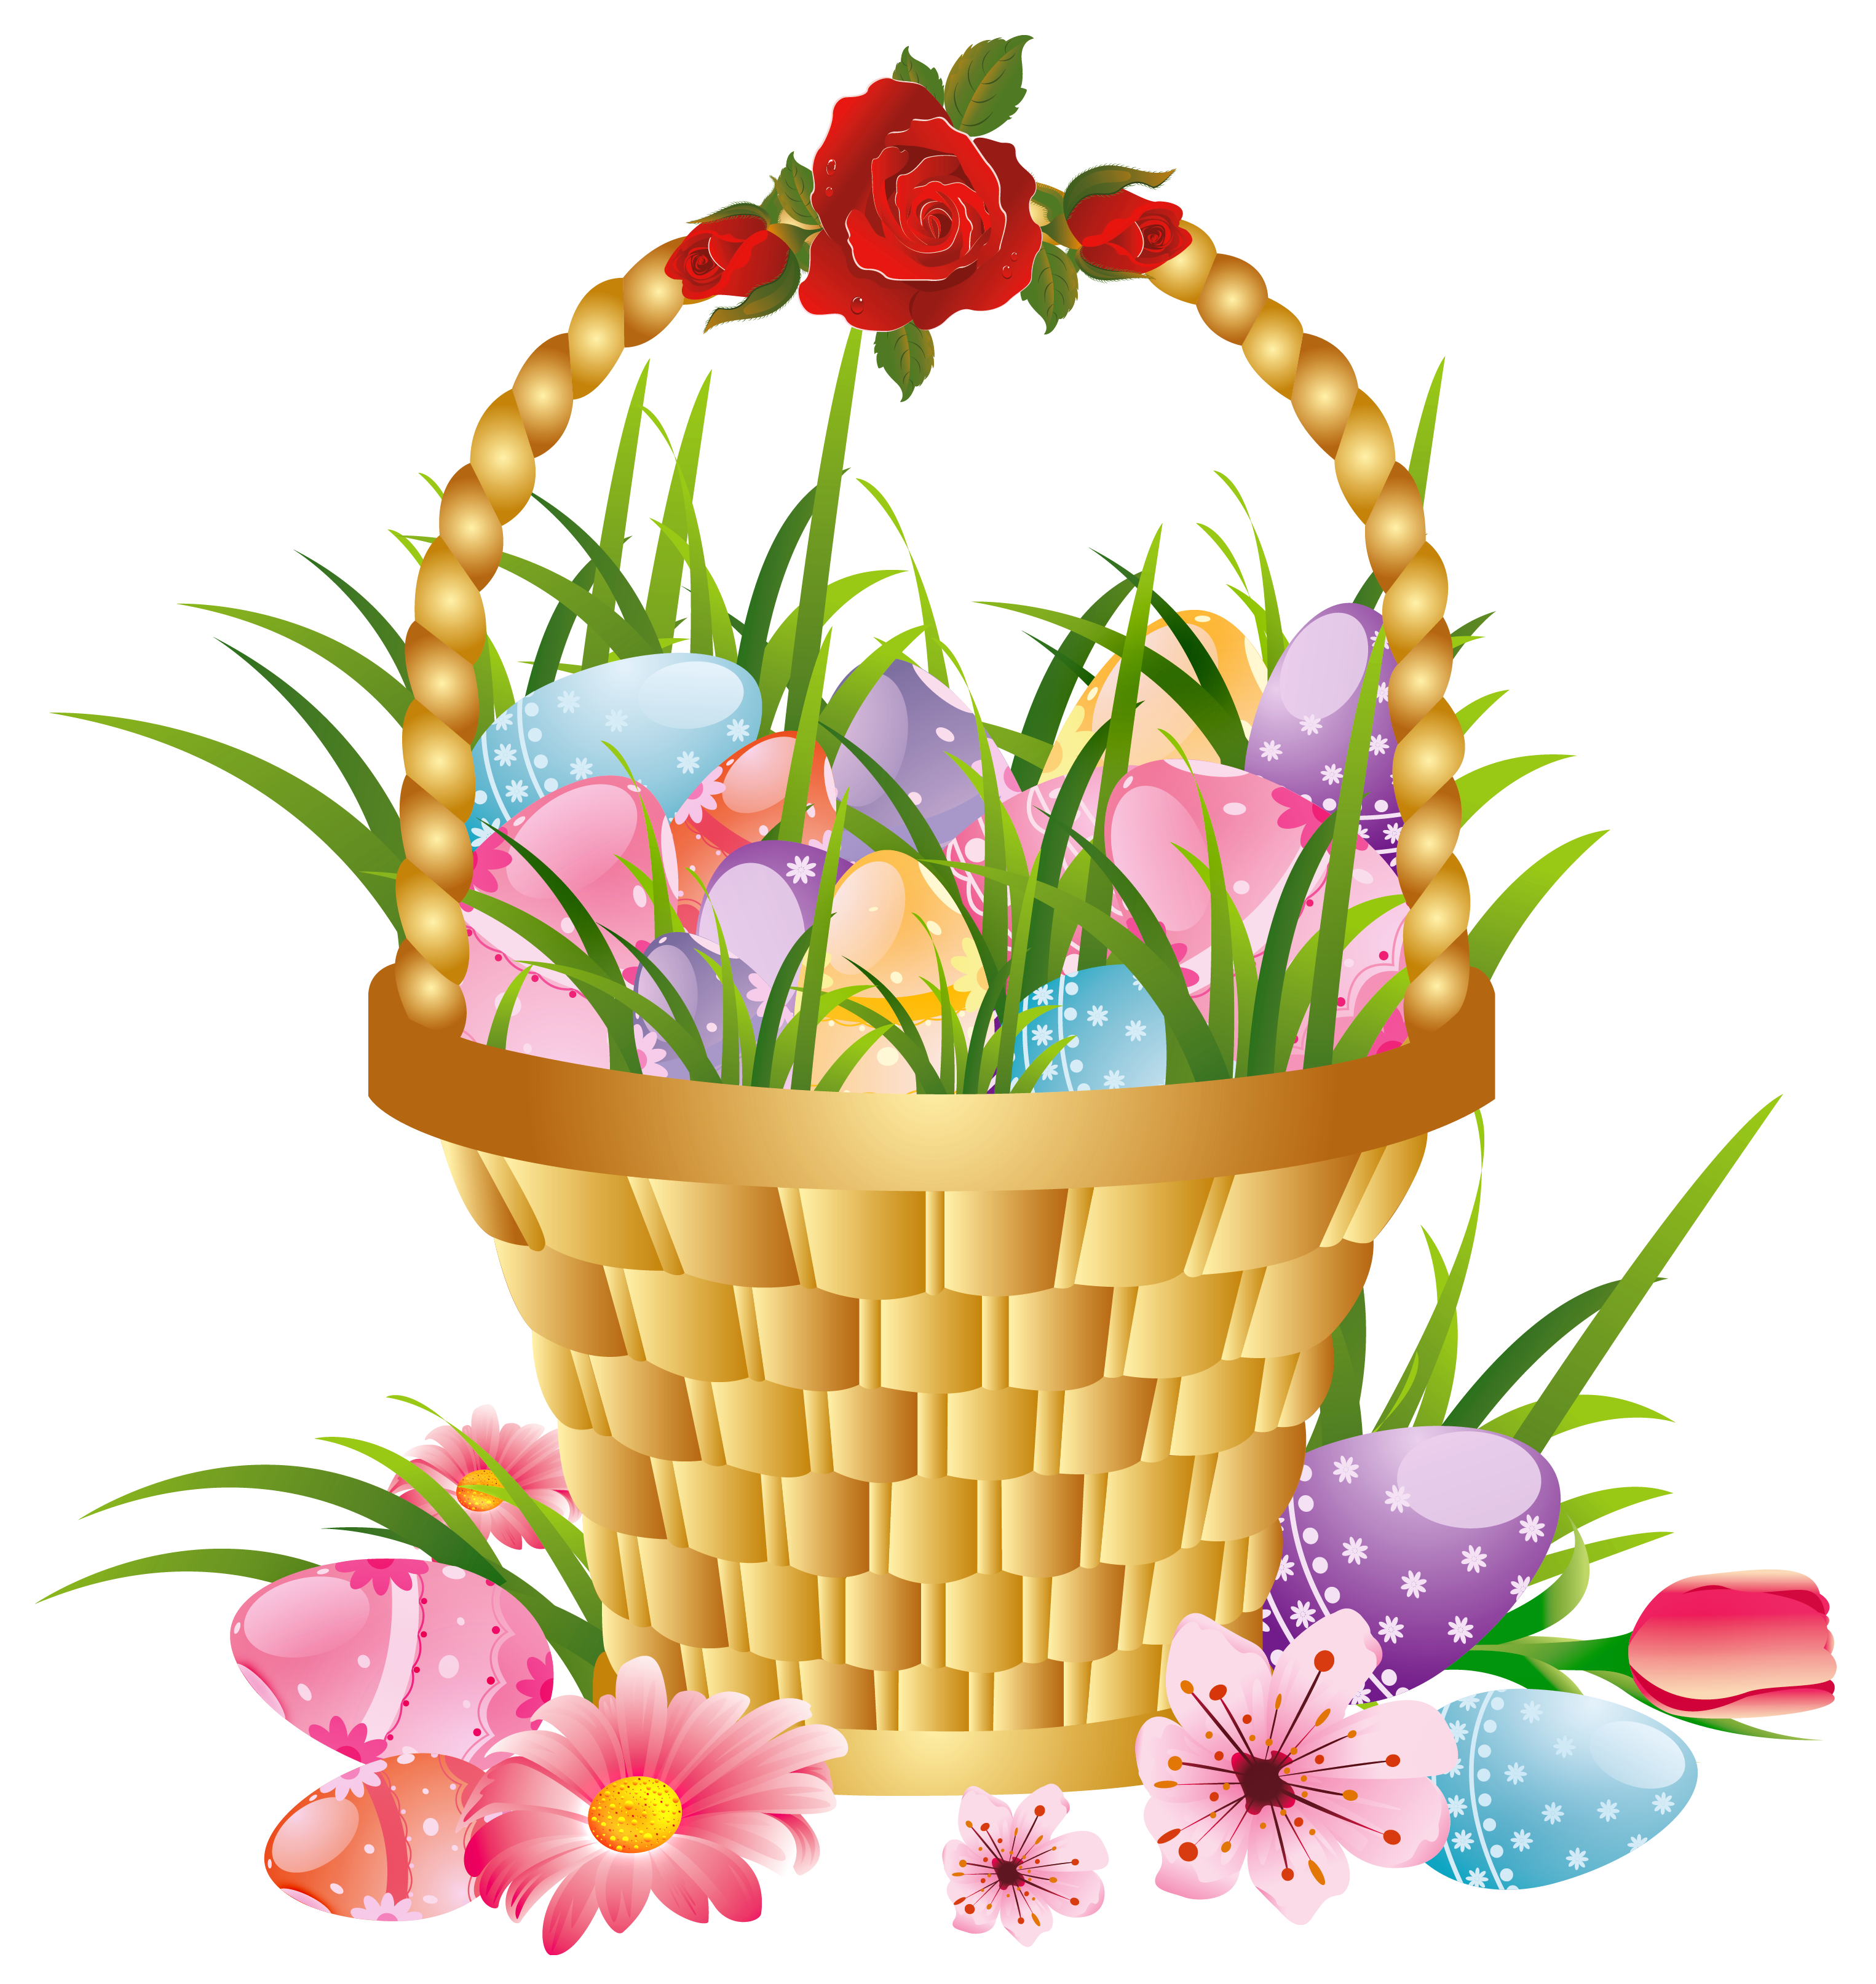 free clipart gift baskets - photo #27